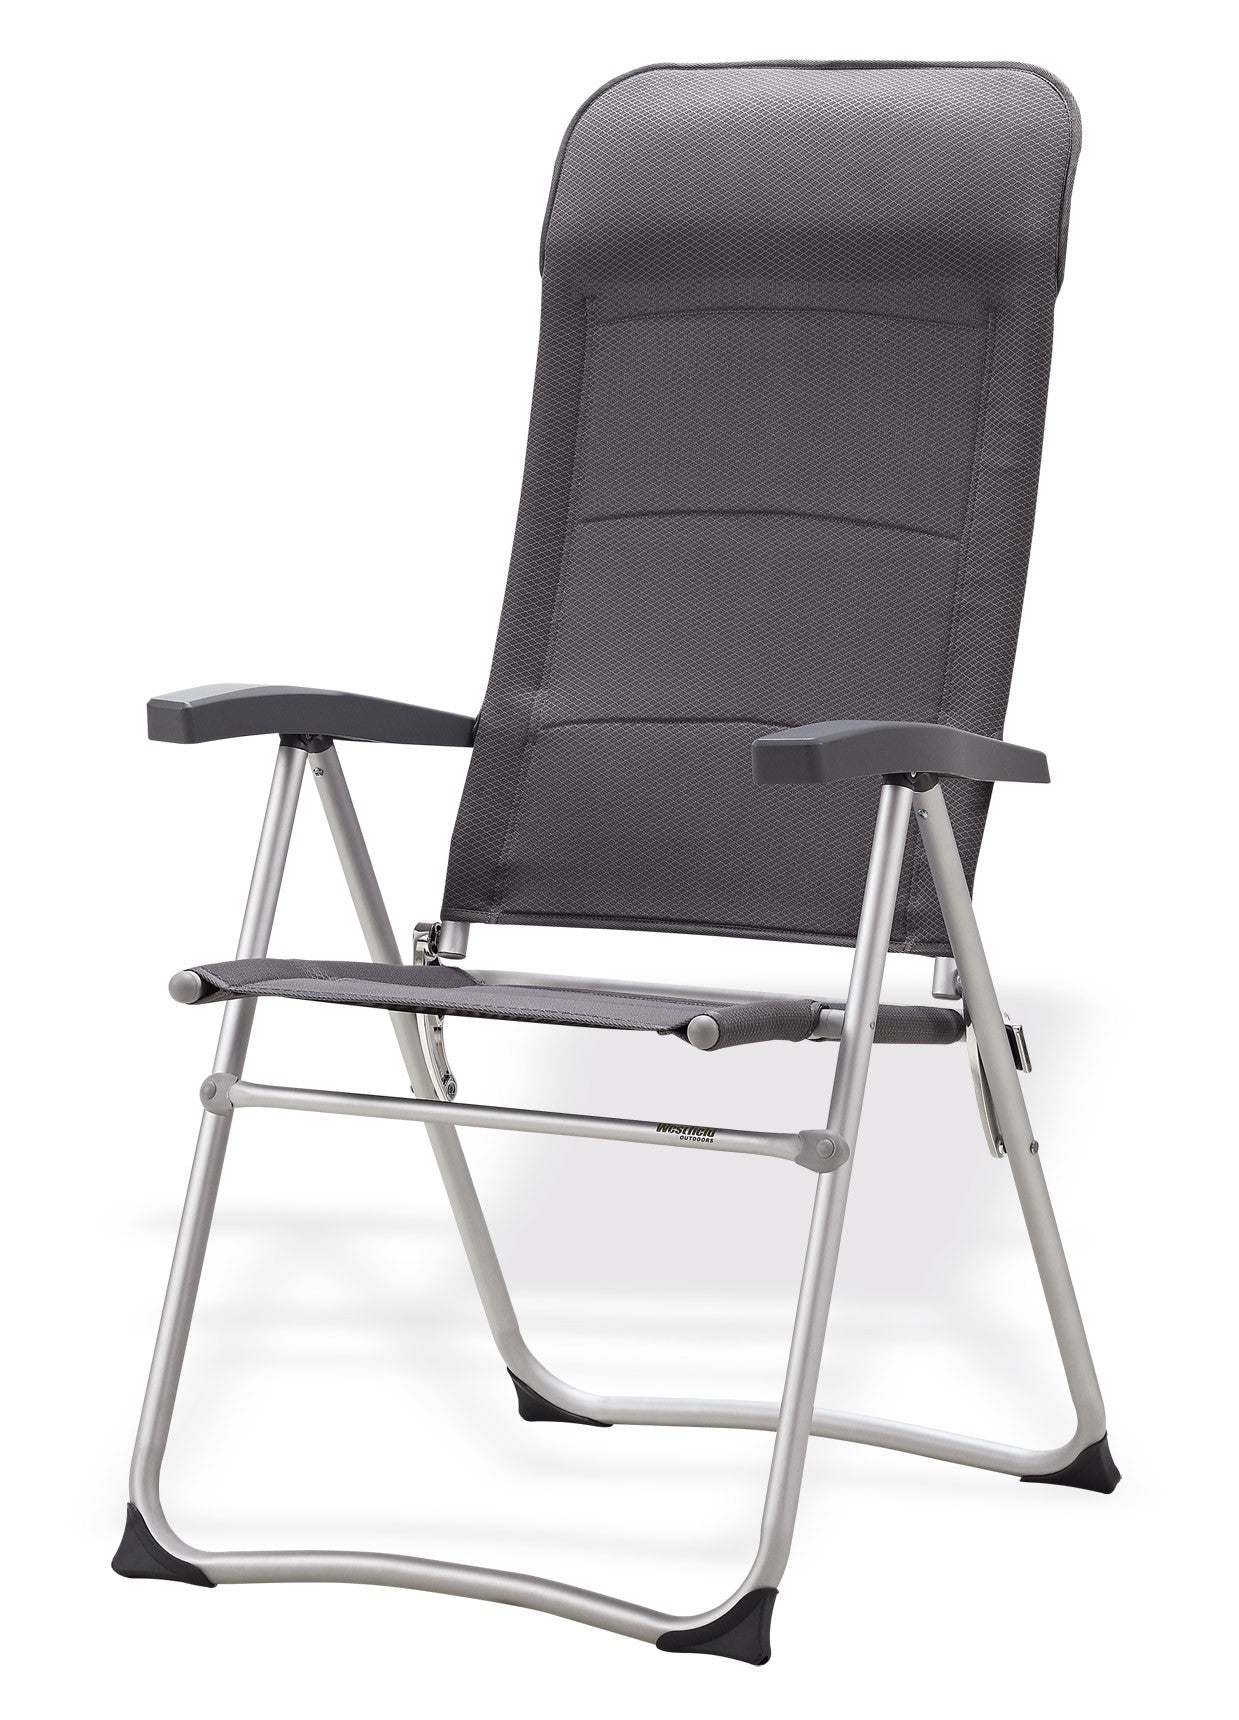 westfield outdoors folding chairs